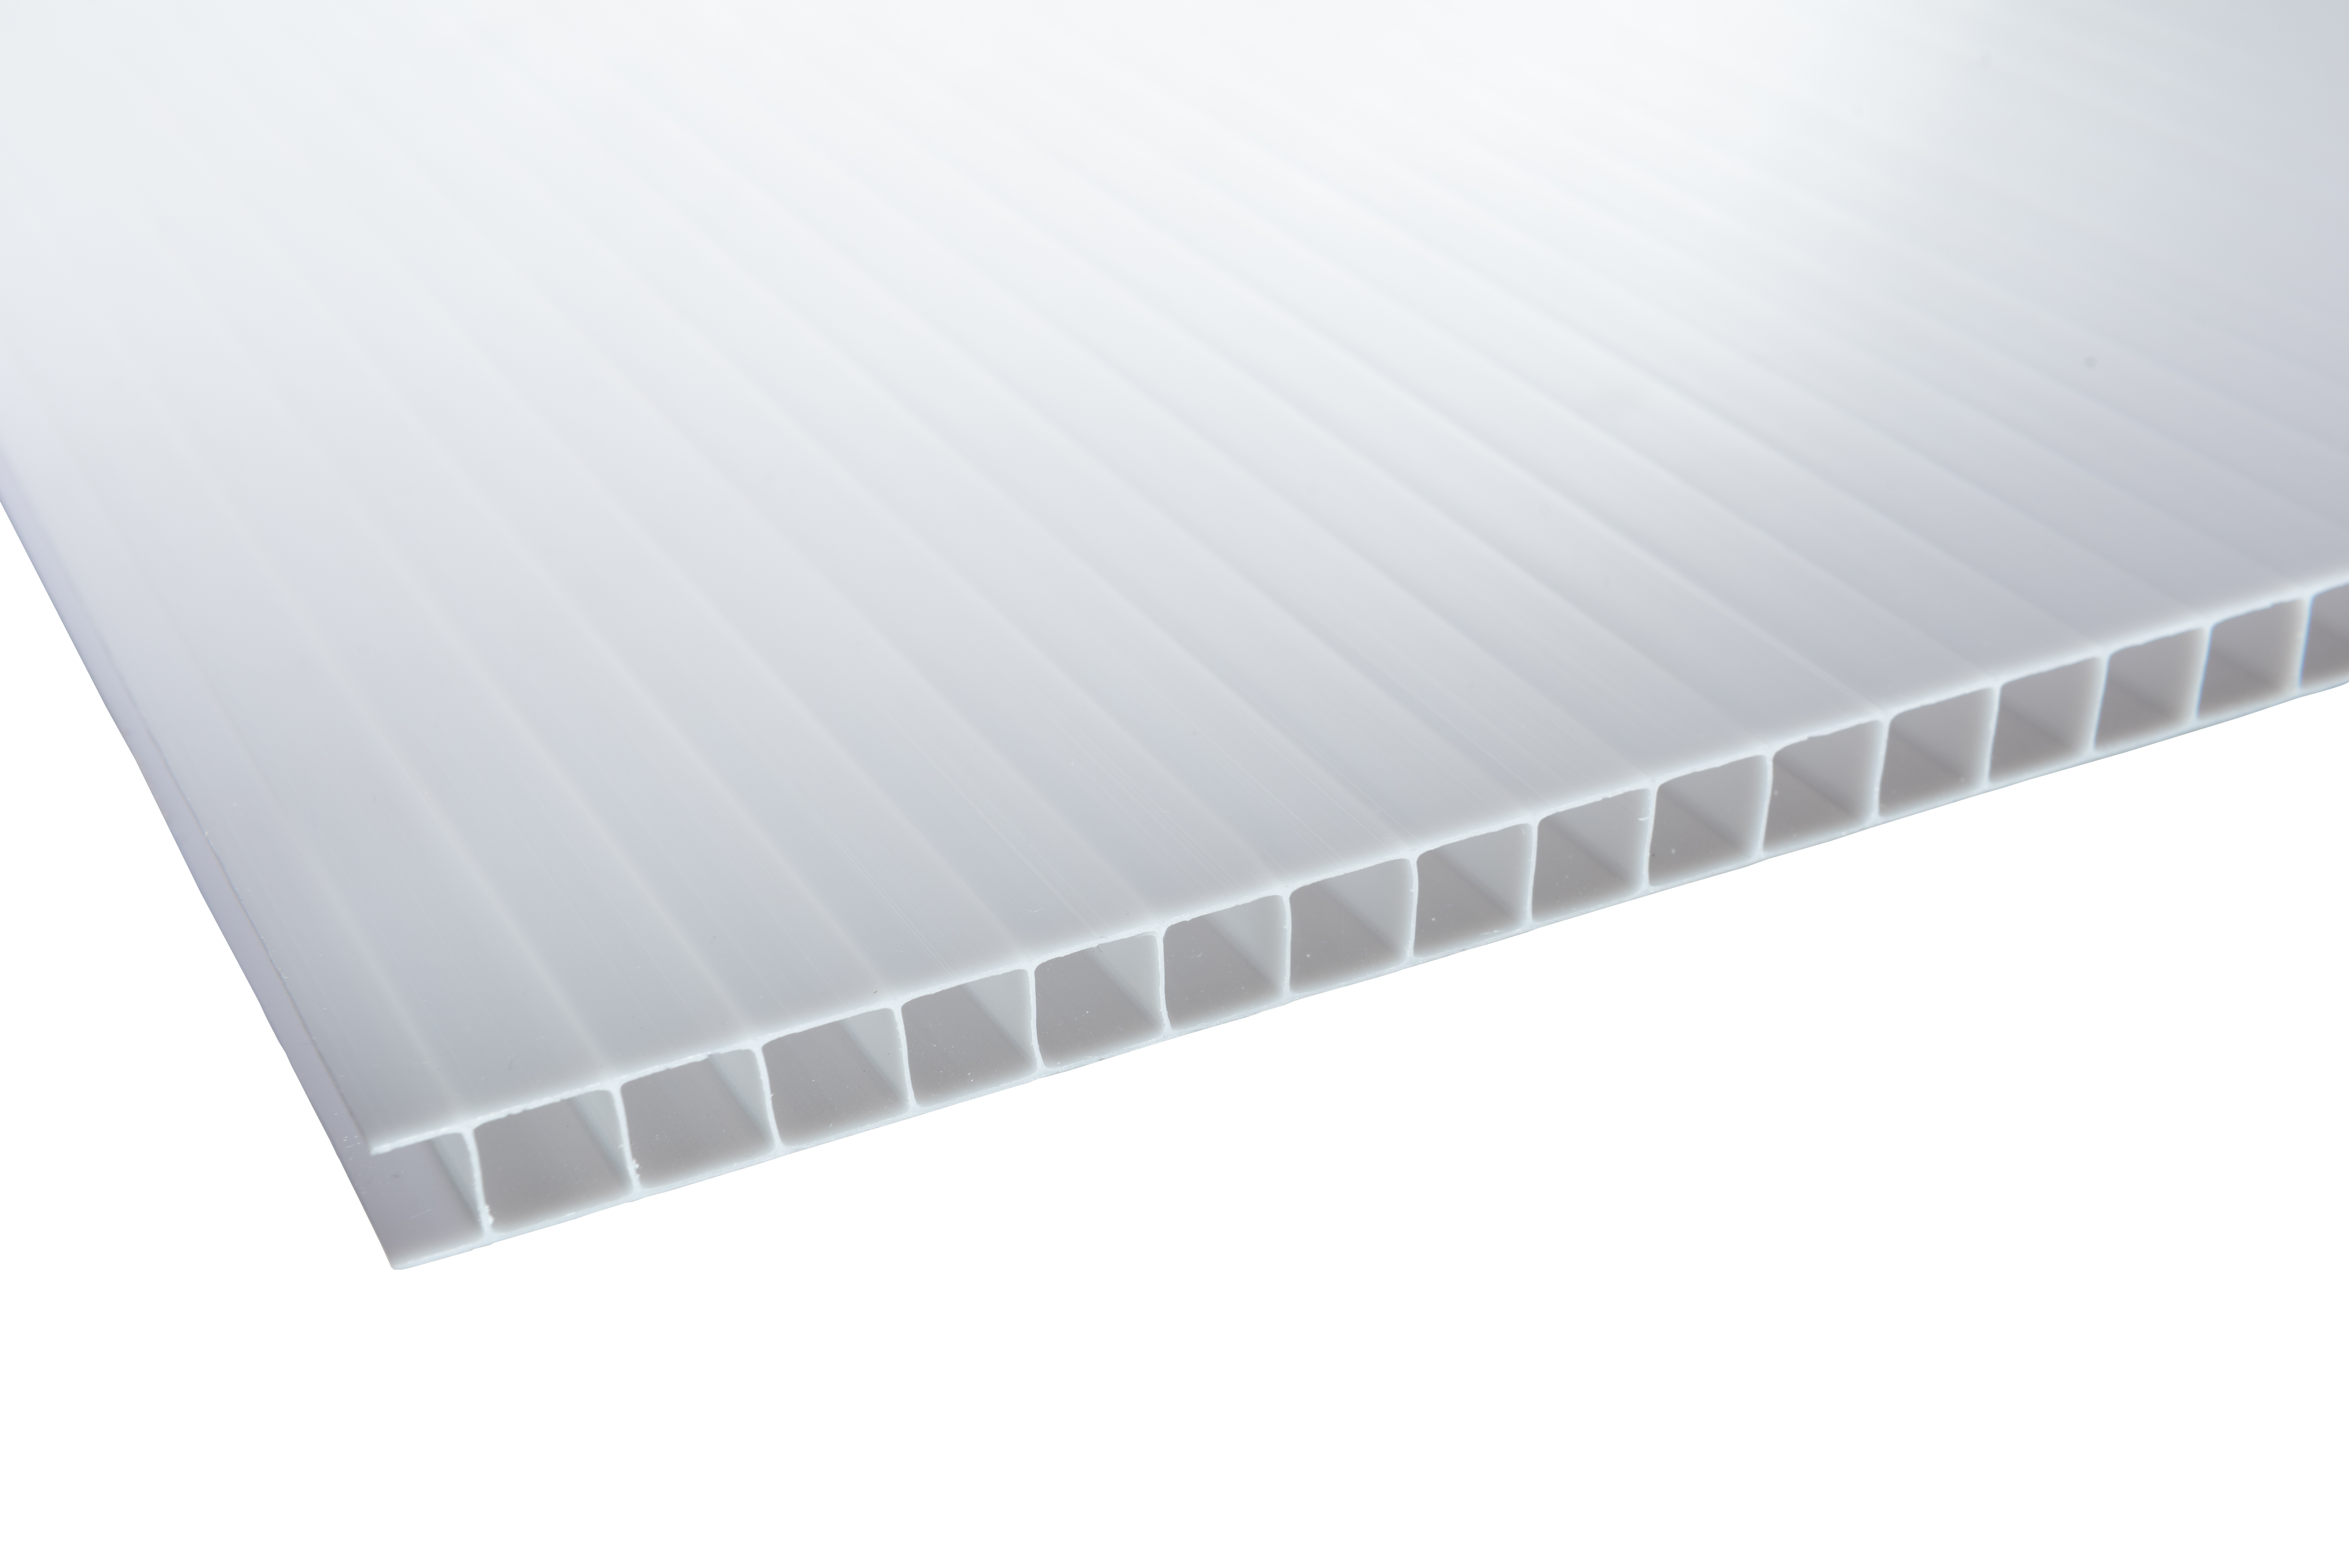 Image of 10mm Opal Multiwall Polycarbonate Sheet - 2000 x 700mm